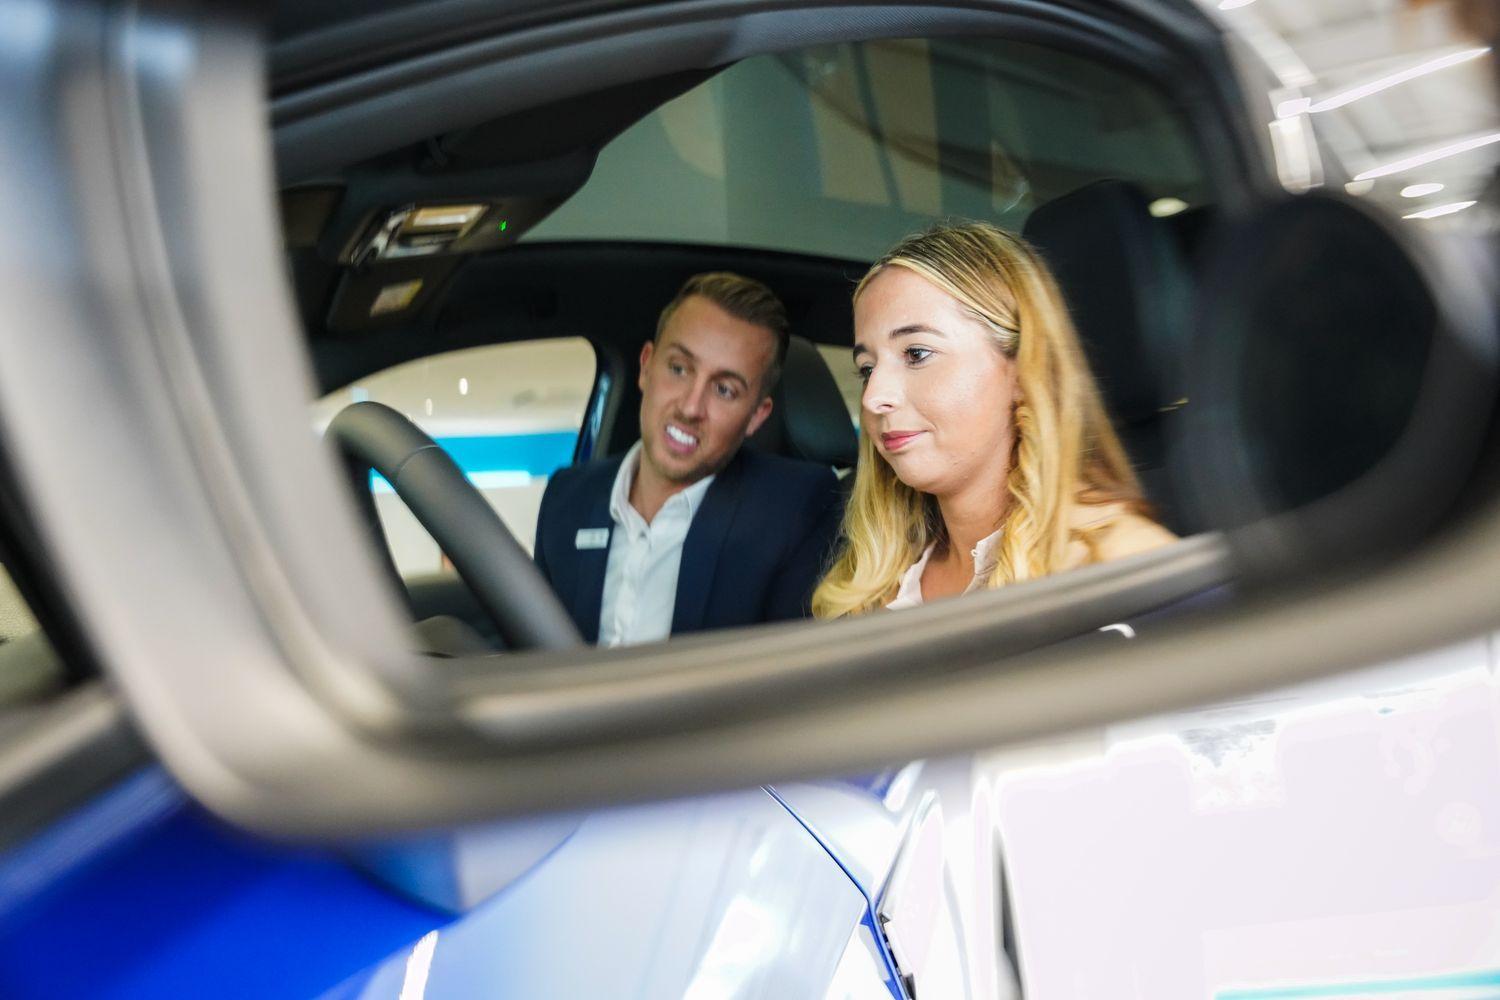 Volkswagen Sales Advisor chats to customer about Volkswagen vehicle whilst they both sit inside